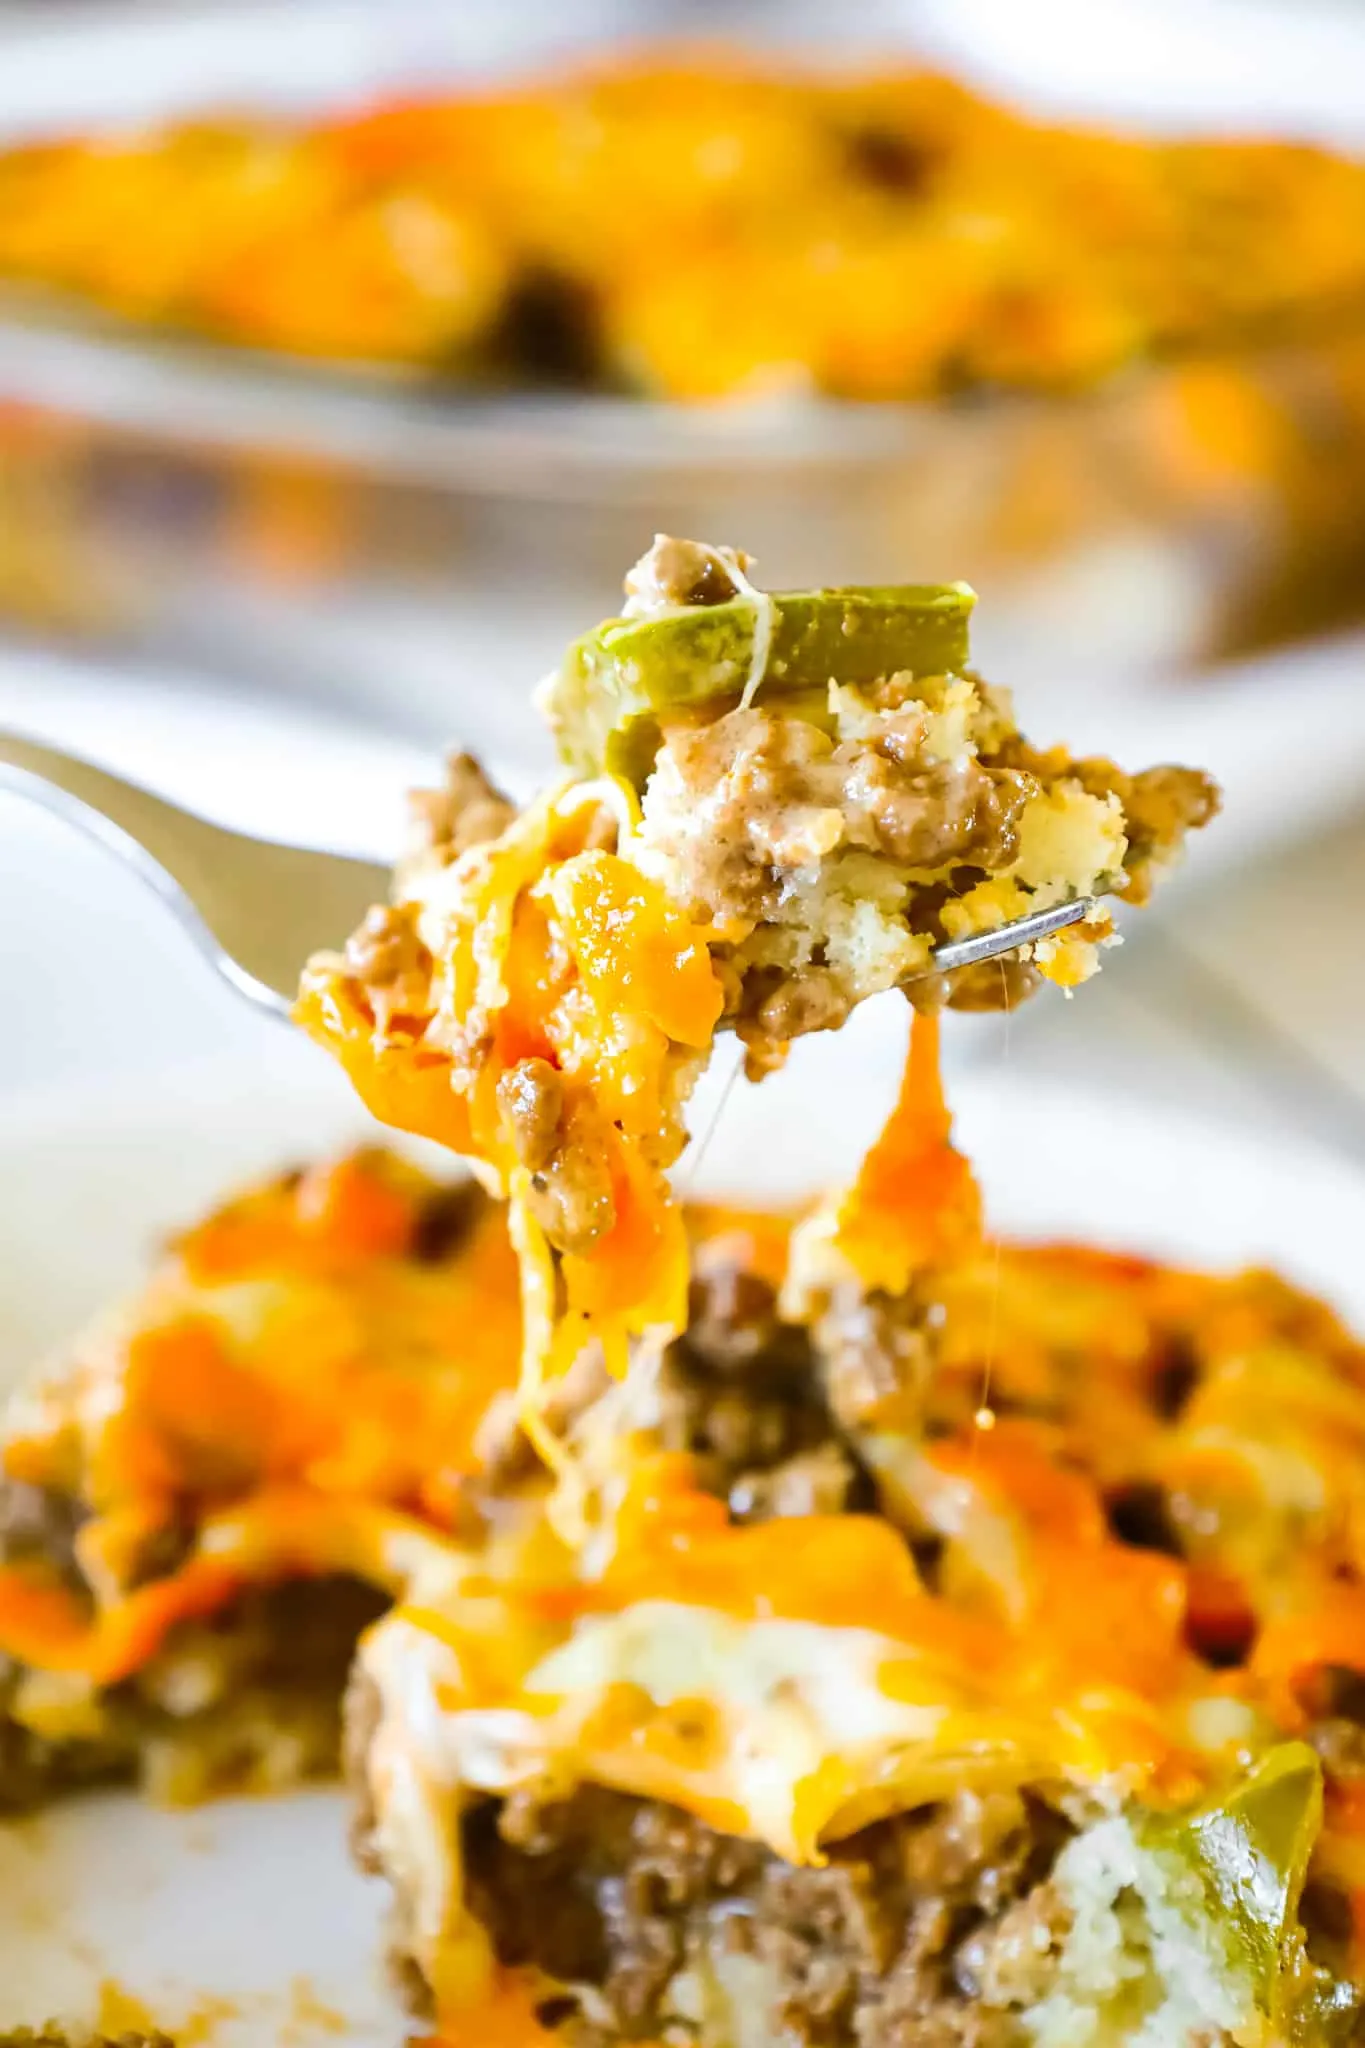 Philly Cheese Steak Casserole is an easy ground beef casserole recipe with a Bisquick base and loaded with green peppers, onions, mozzarella and cheddar cheese.